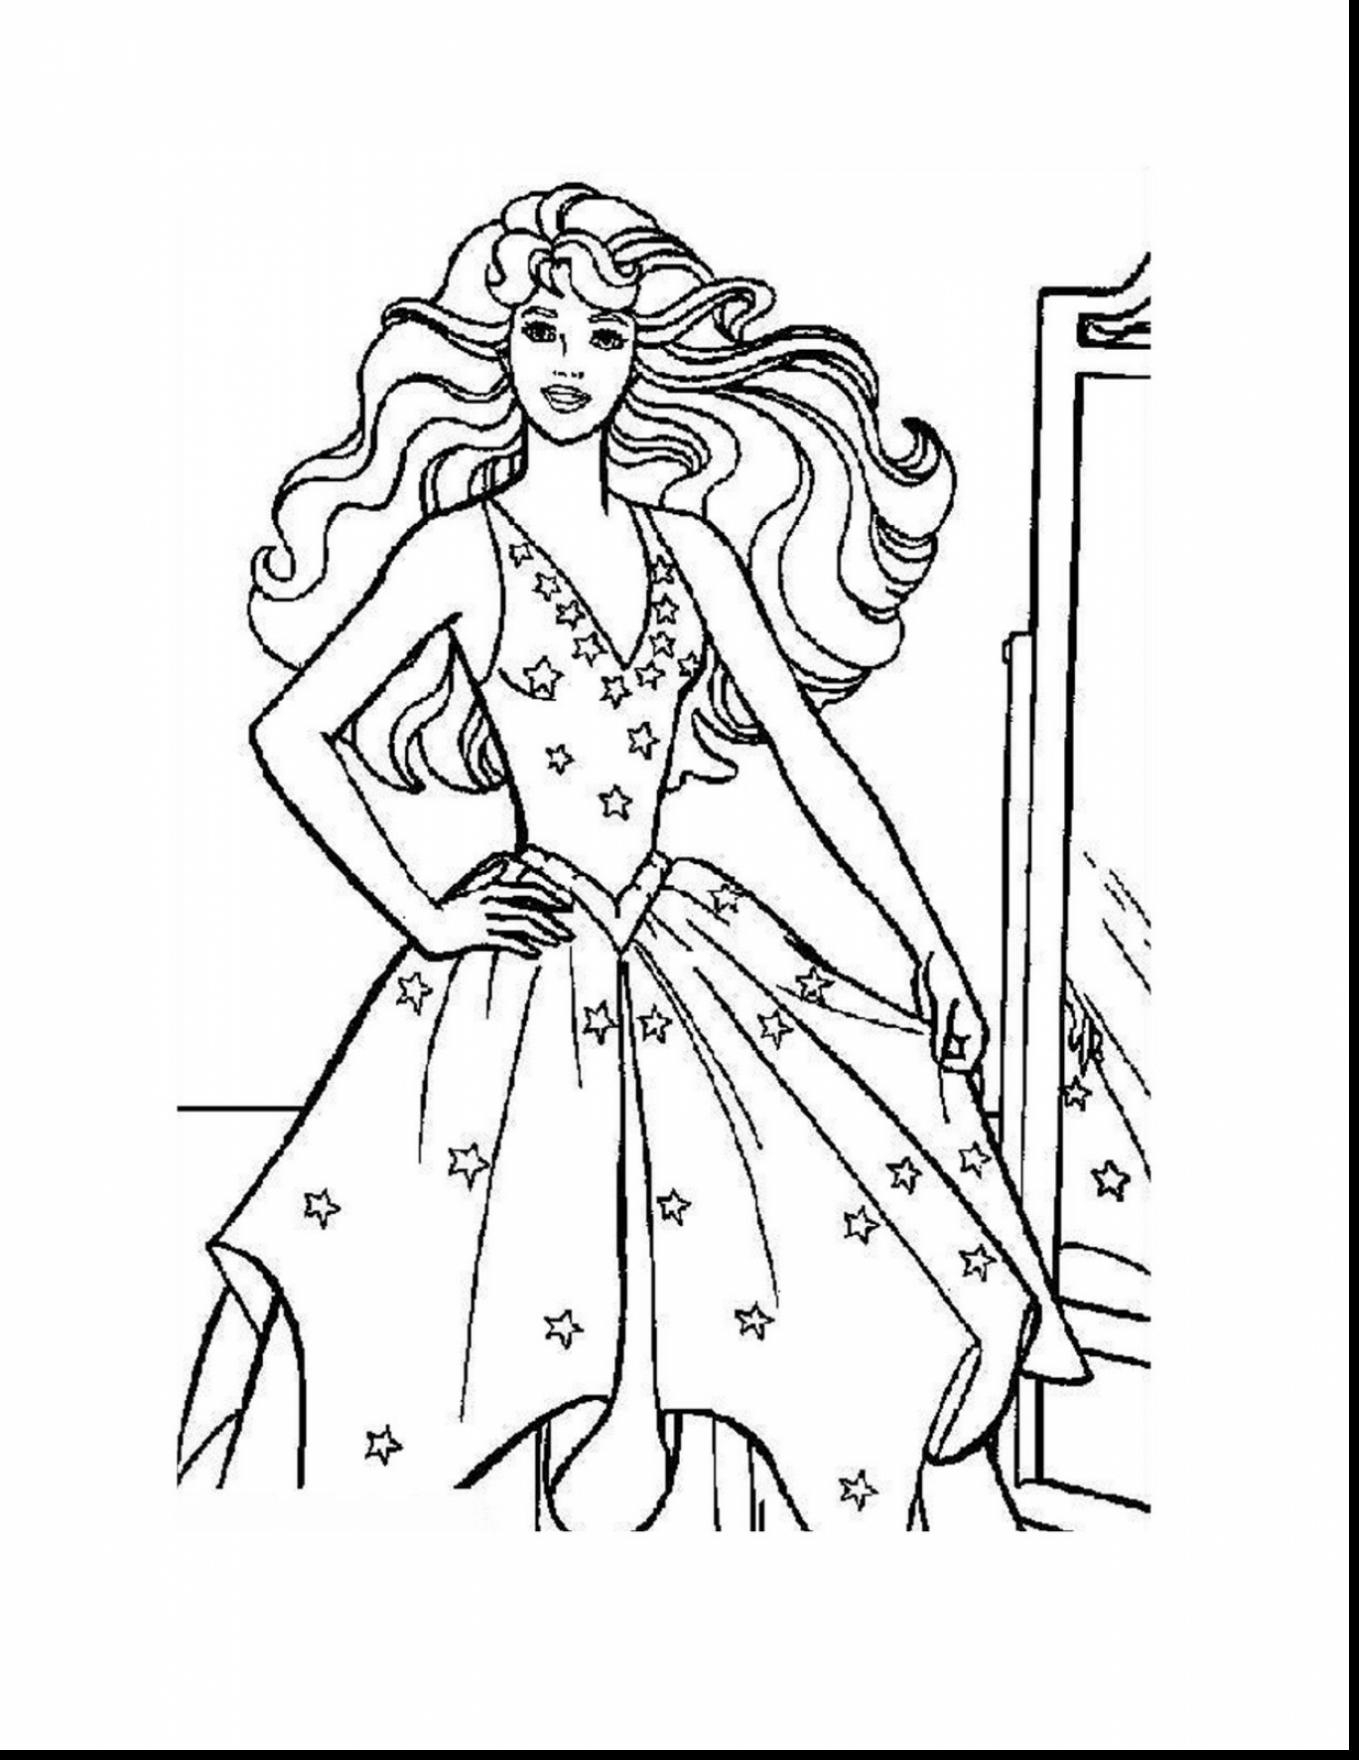 Work Coloring Pages at GetDrawings | Free download